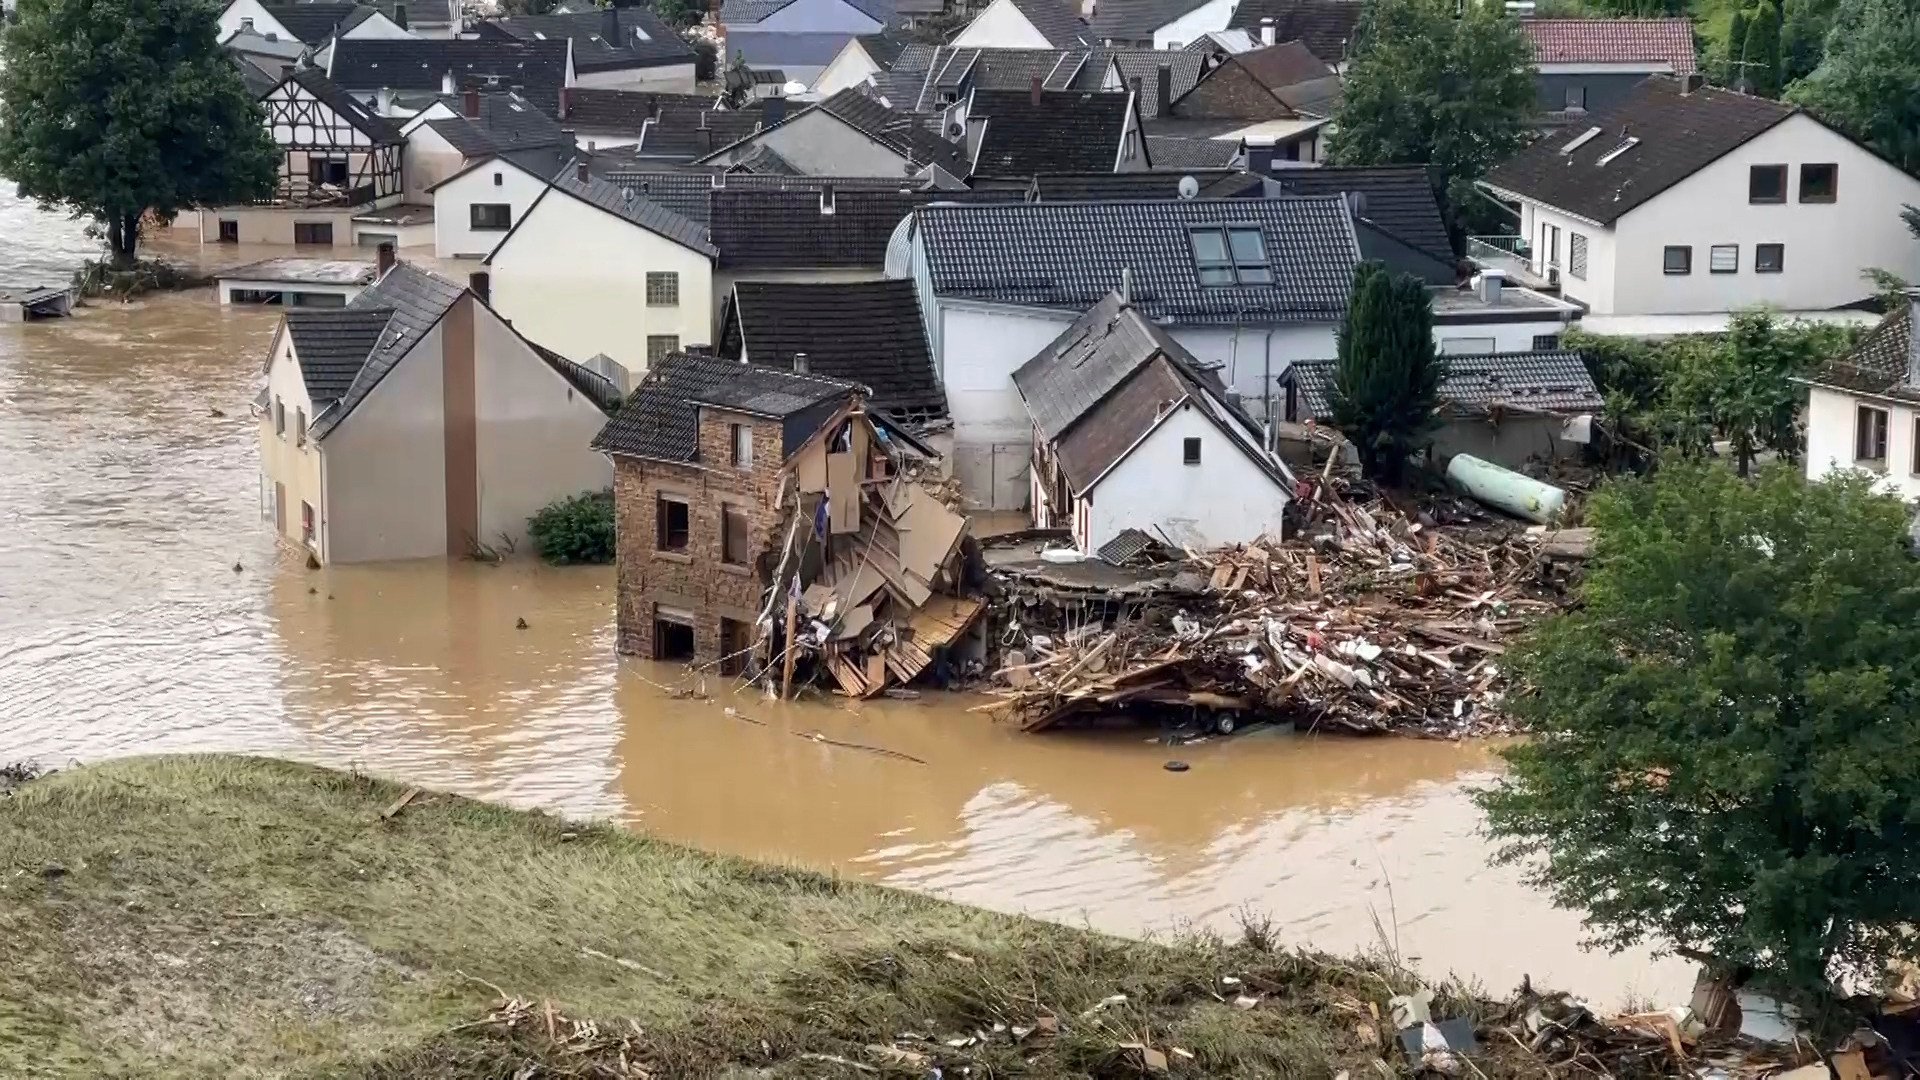 Deadly floods hit western Germany